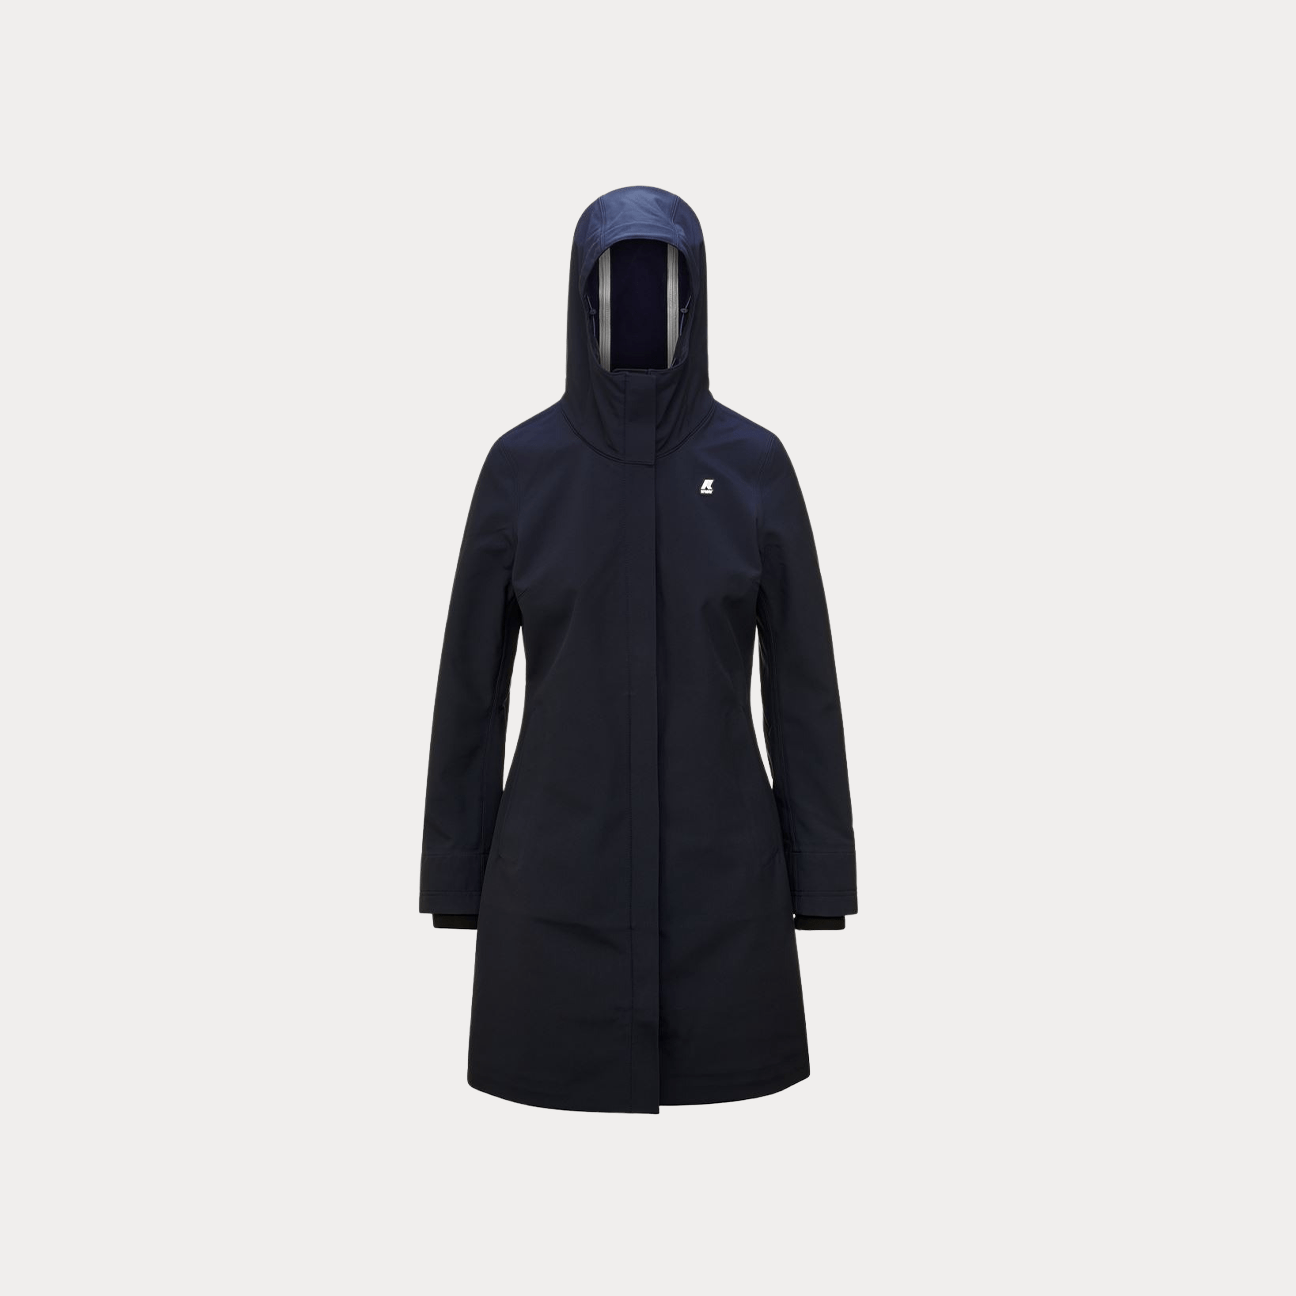 KWAY Cappotto Stephy Bonded Blue e Nero